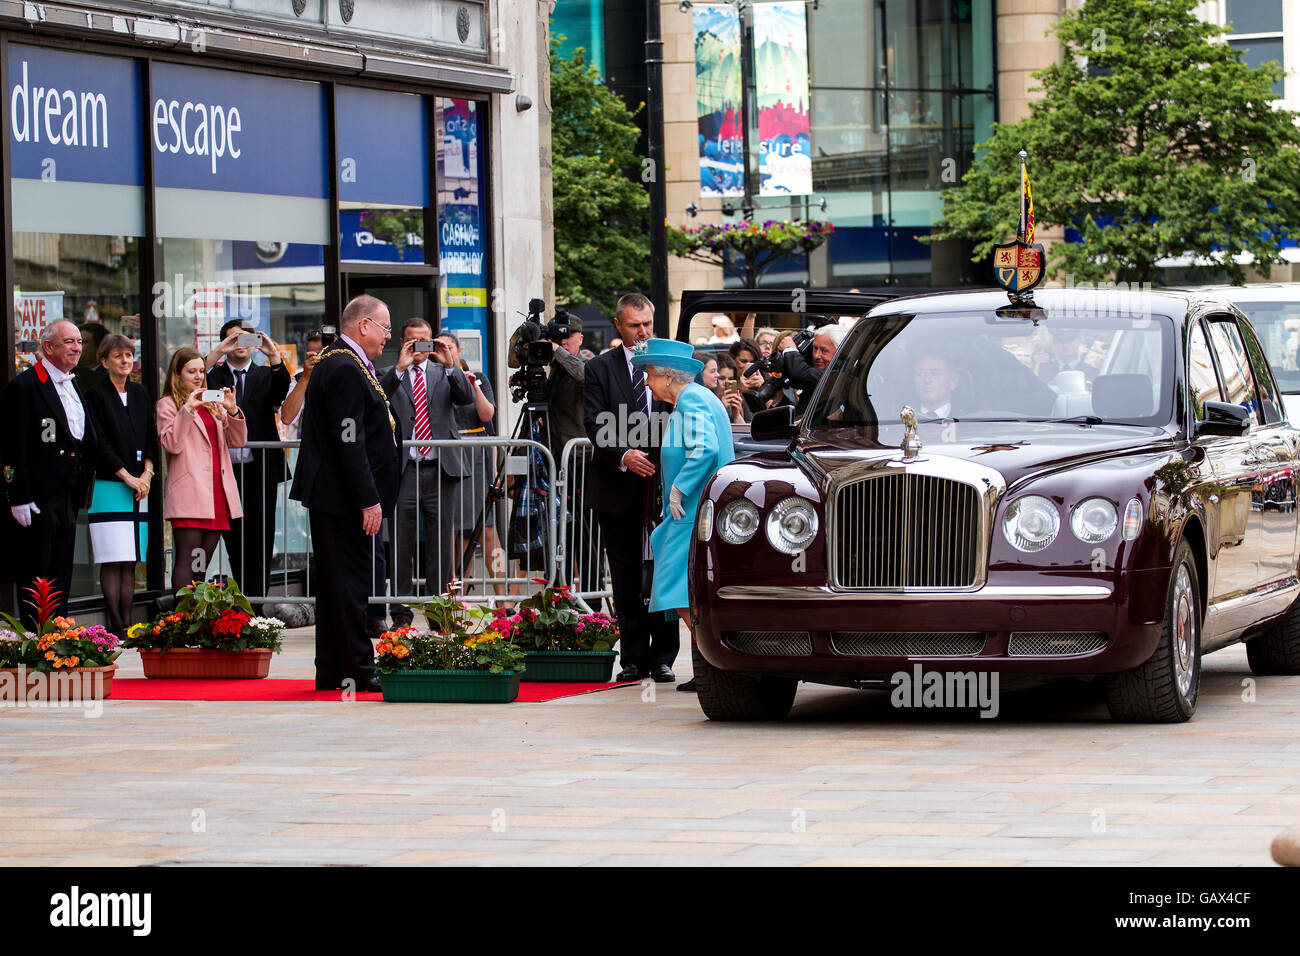 Dundee, Tayside, Scotland, UK. July 6th 2016. Her Majesty The Queen and His Royal Highness Prince Philip arriving at the Chambers of Commerce in the City Square today during their Royal visit to Dundee. They were both met by Dundee`s Lord Provost Bob  Duncan [left] who is Her Majesty`s Lord Lieutenant of the City of Dundee. Credit: Dundee Photographics / Alamy Live News Stock Photo